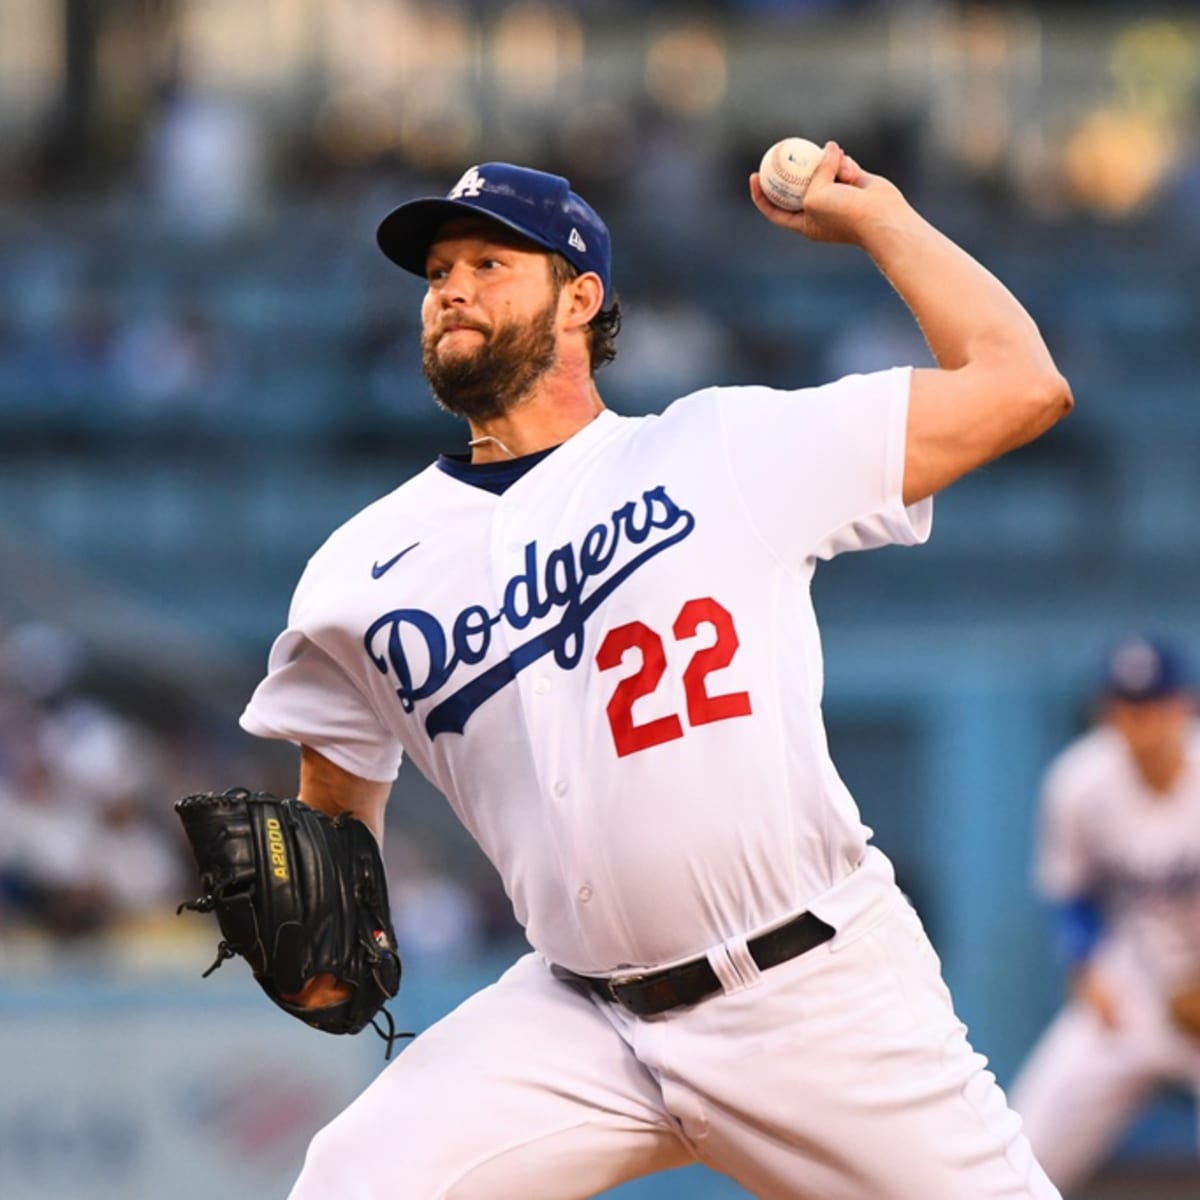 Clayton Kershaw's Meltdown May Be Just the Start of the Dodgers